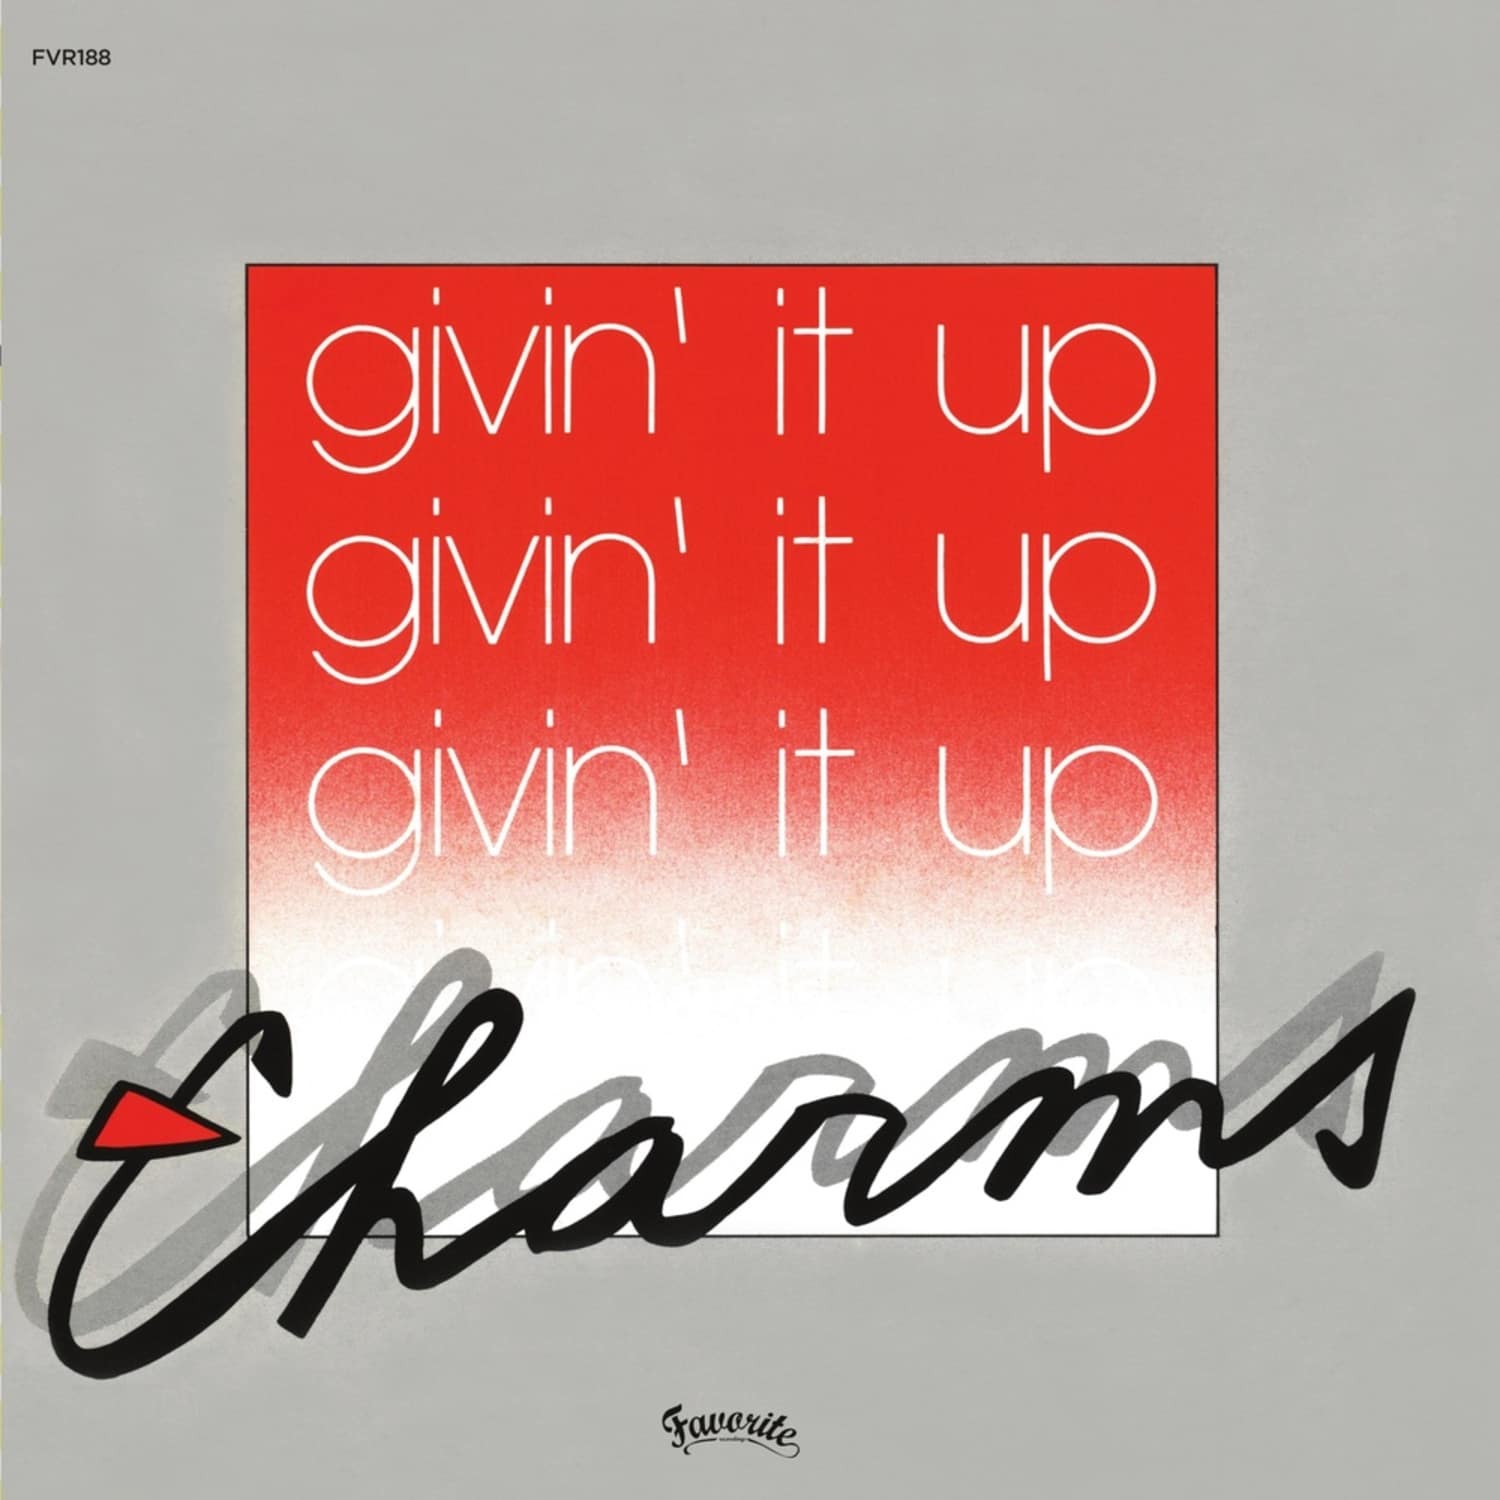 Charms France-Lise - GIVIN IT UP / POUR MOI CA VA 